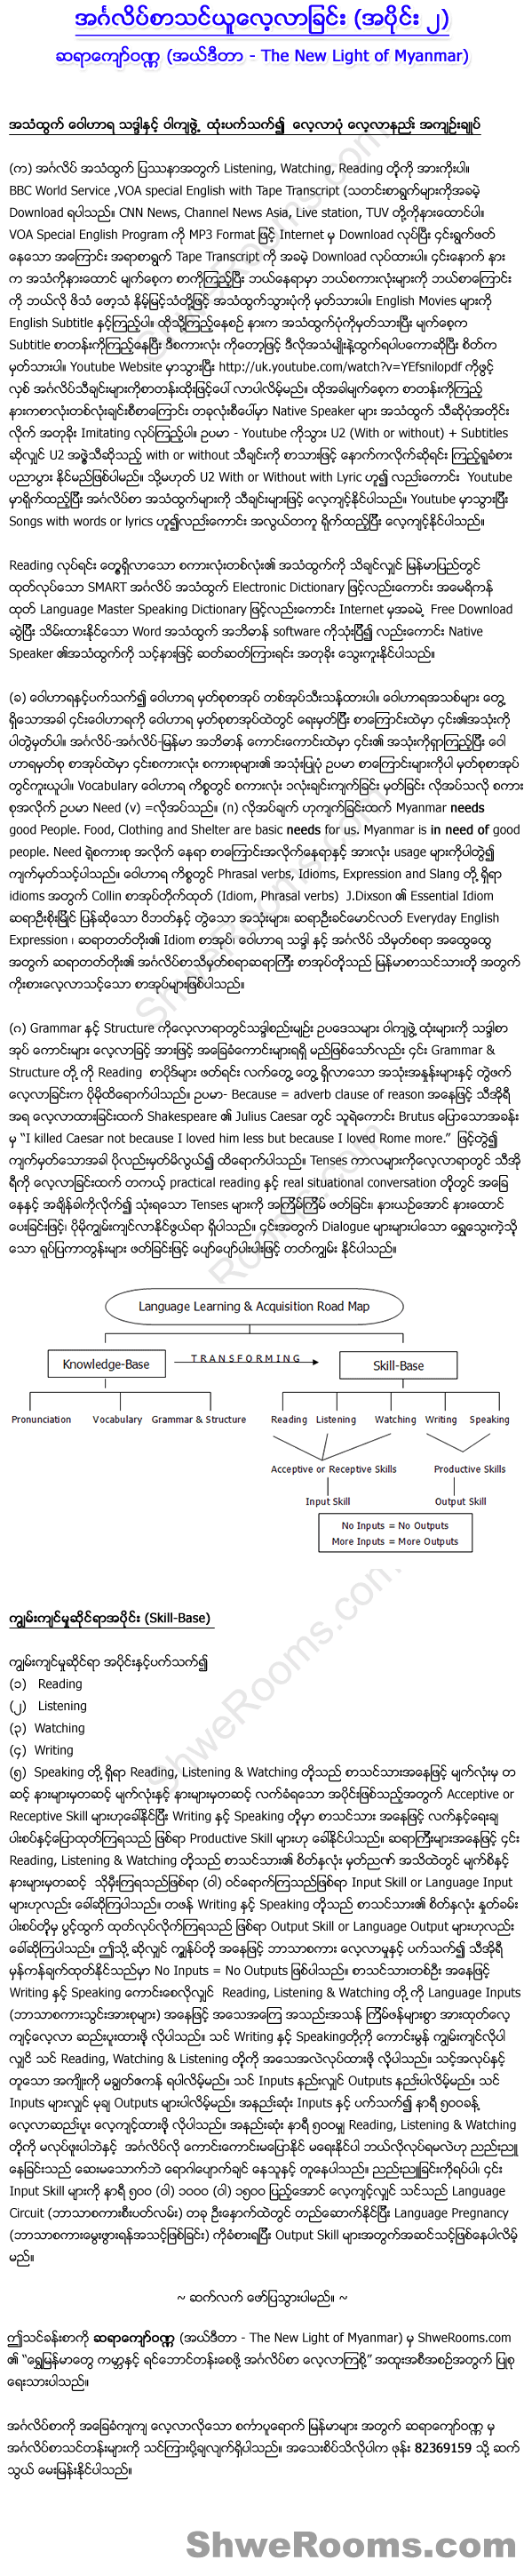 Lesson 2: Learning English (Part 2). In Part 2 of Learning English, Sayar Kyaw Wunna continues to explain the other areas of Language Learning and Acquisition Road Map . He emphasises on Reading, Listening, Watching, Writing and Speaking.